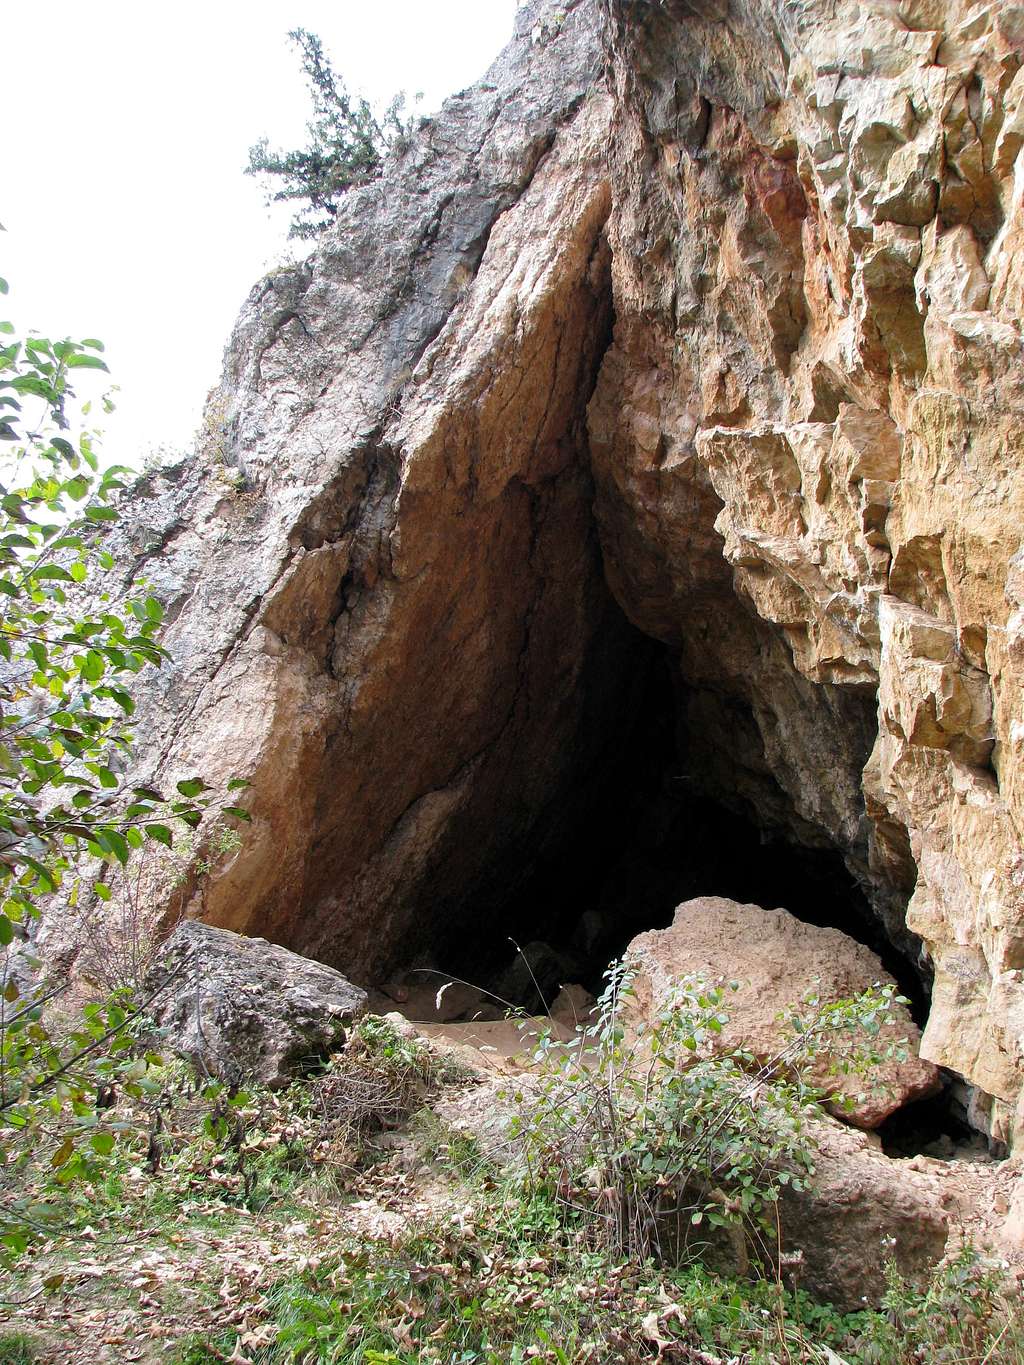 The other cave